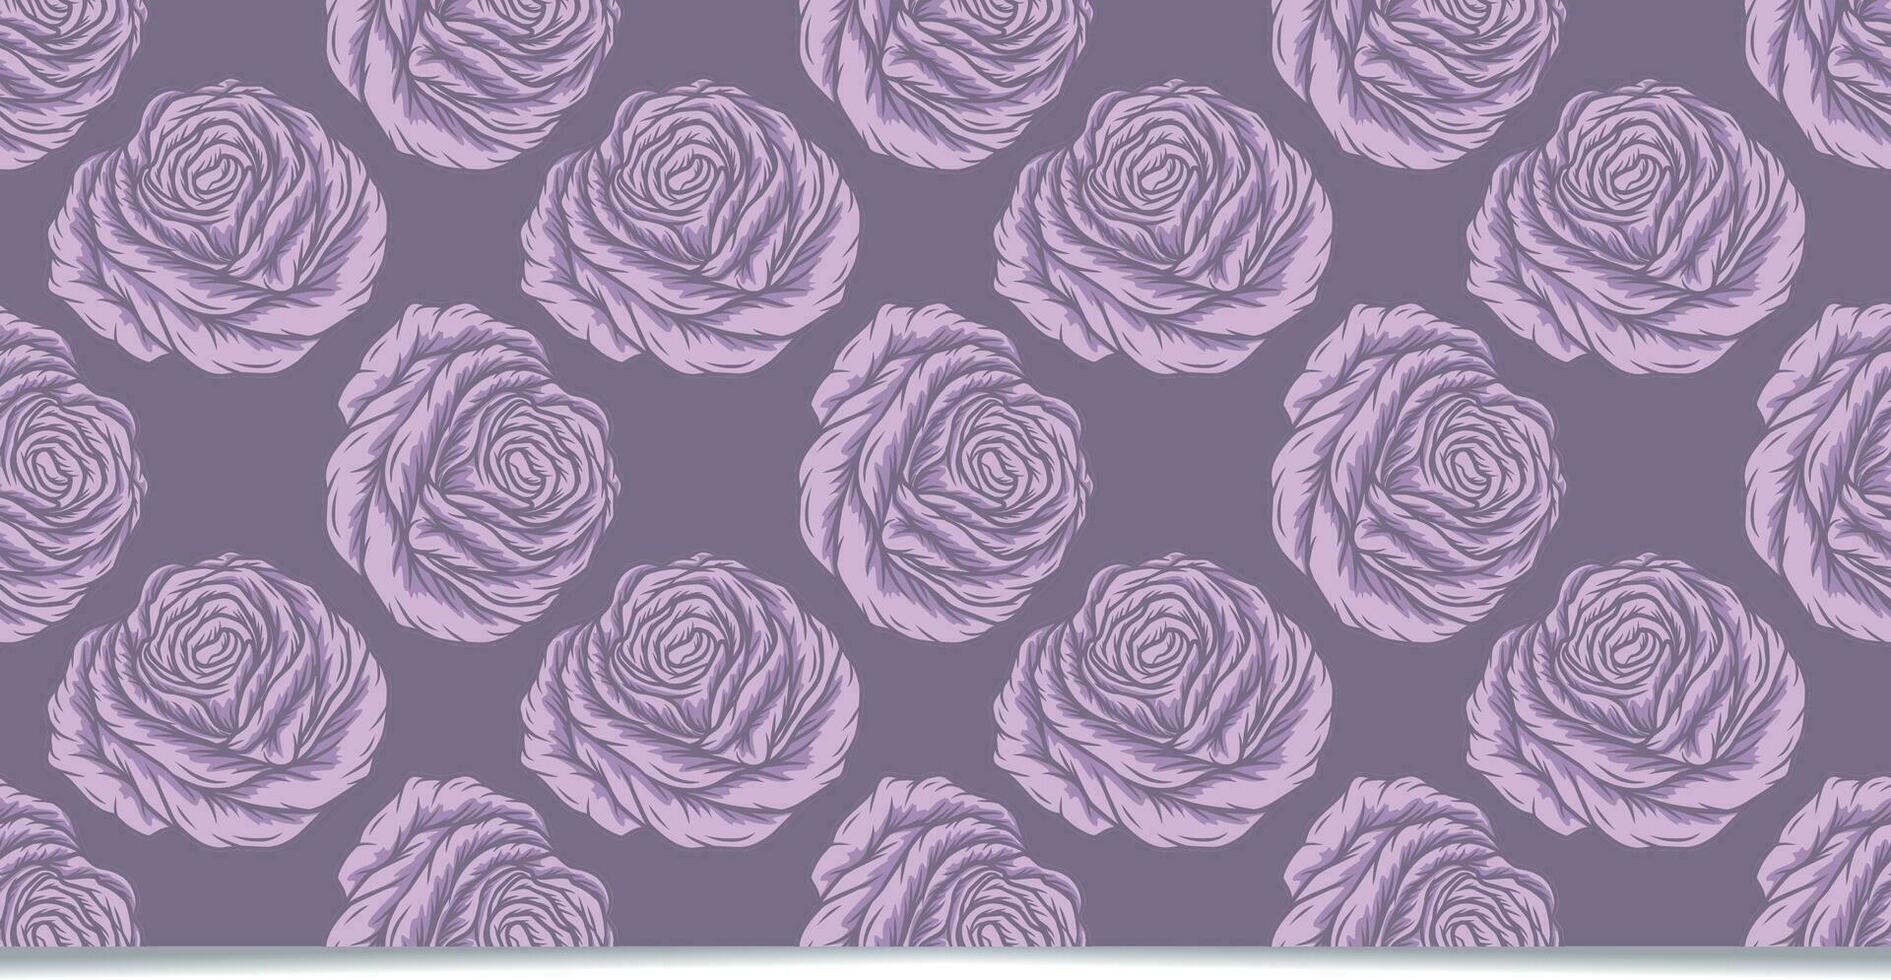 Seamless Pattern with Rose Illustration vector